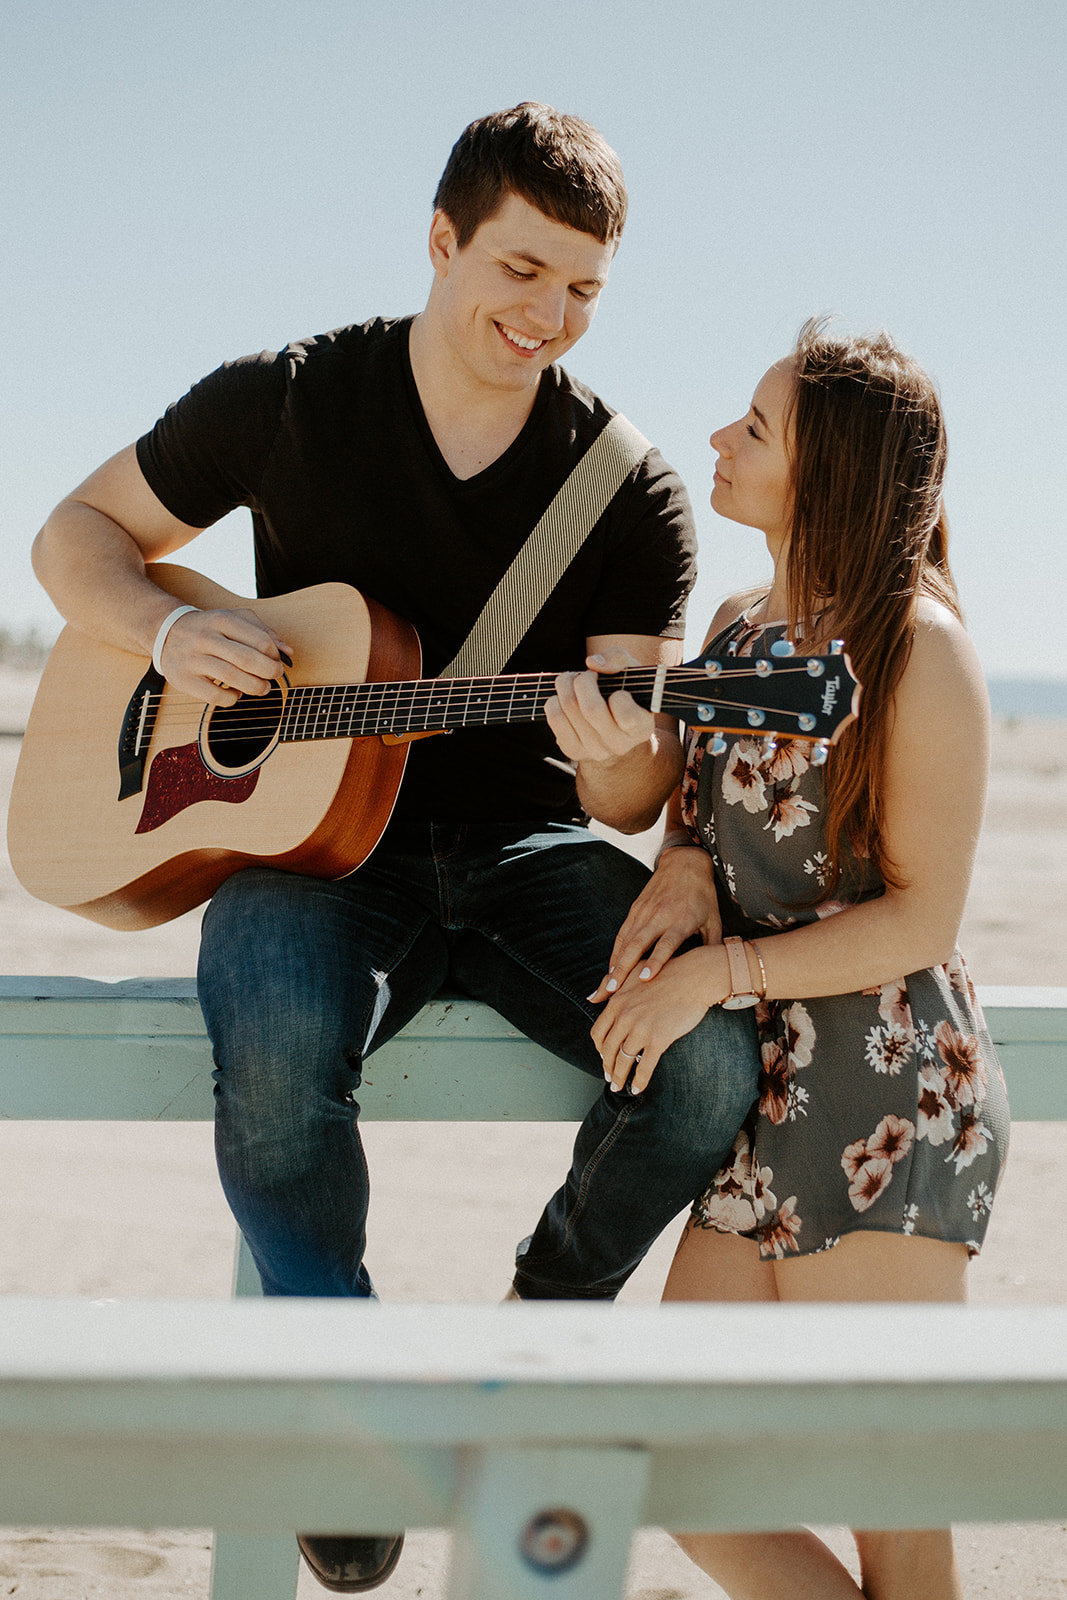 Guy playing an acoustic guitar while his girlfriend smiles at him during their engagement session